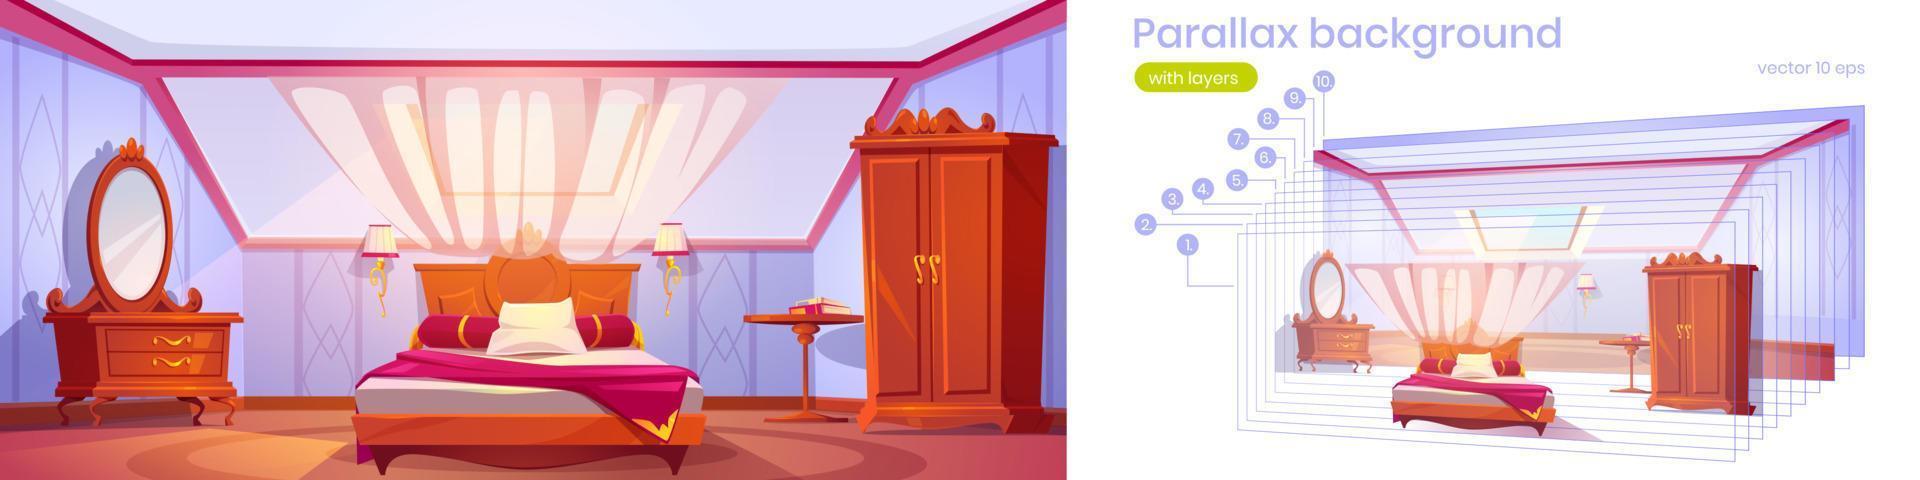 Parallax background attic bedroom or guest room vector